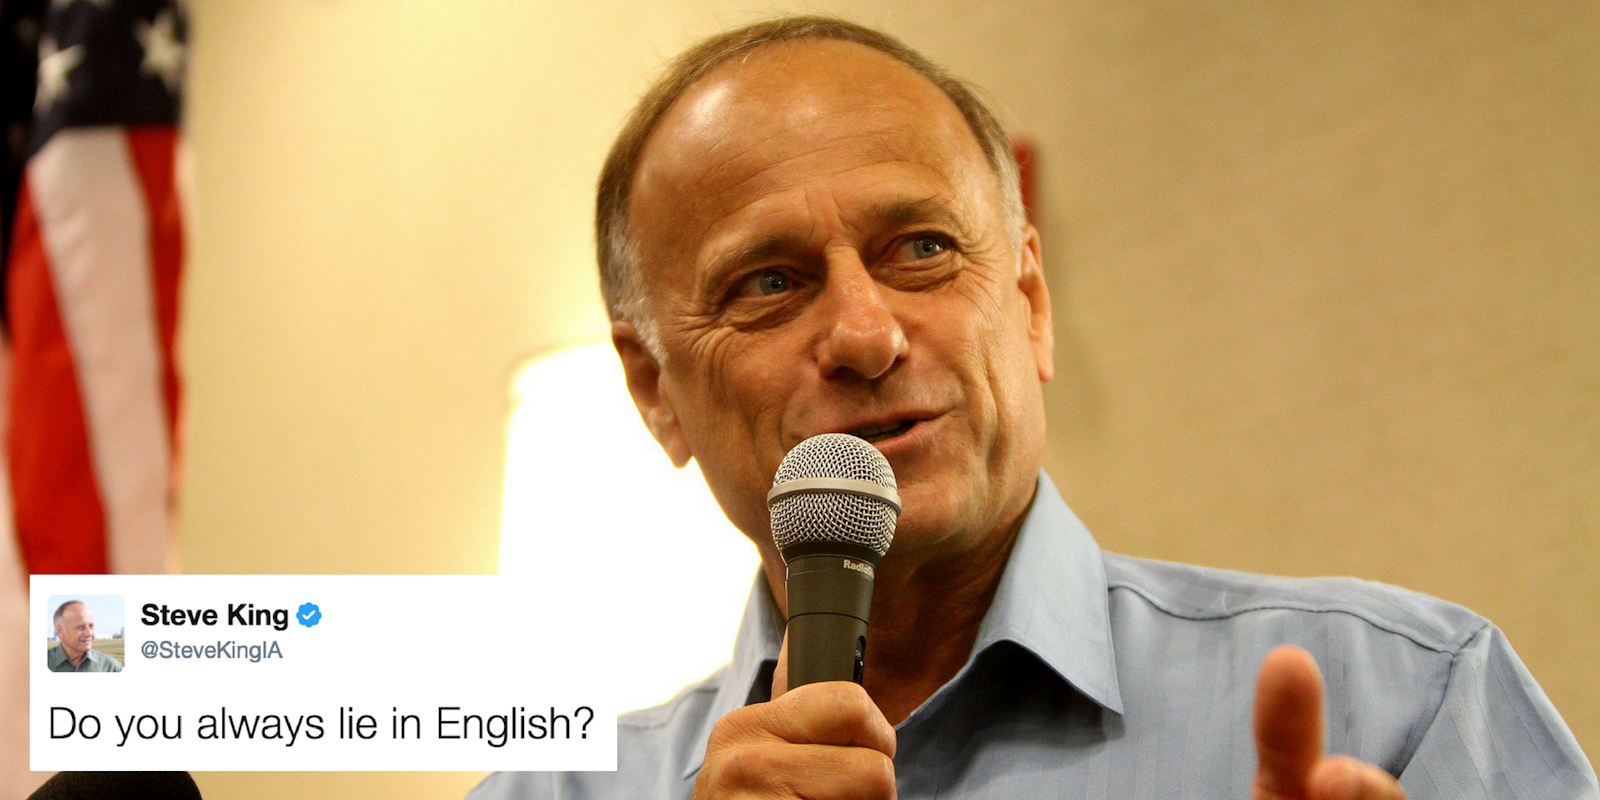 Republican state rep for Iowa Steve King